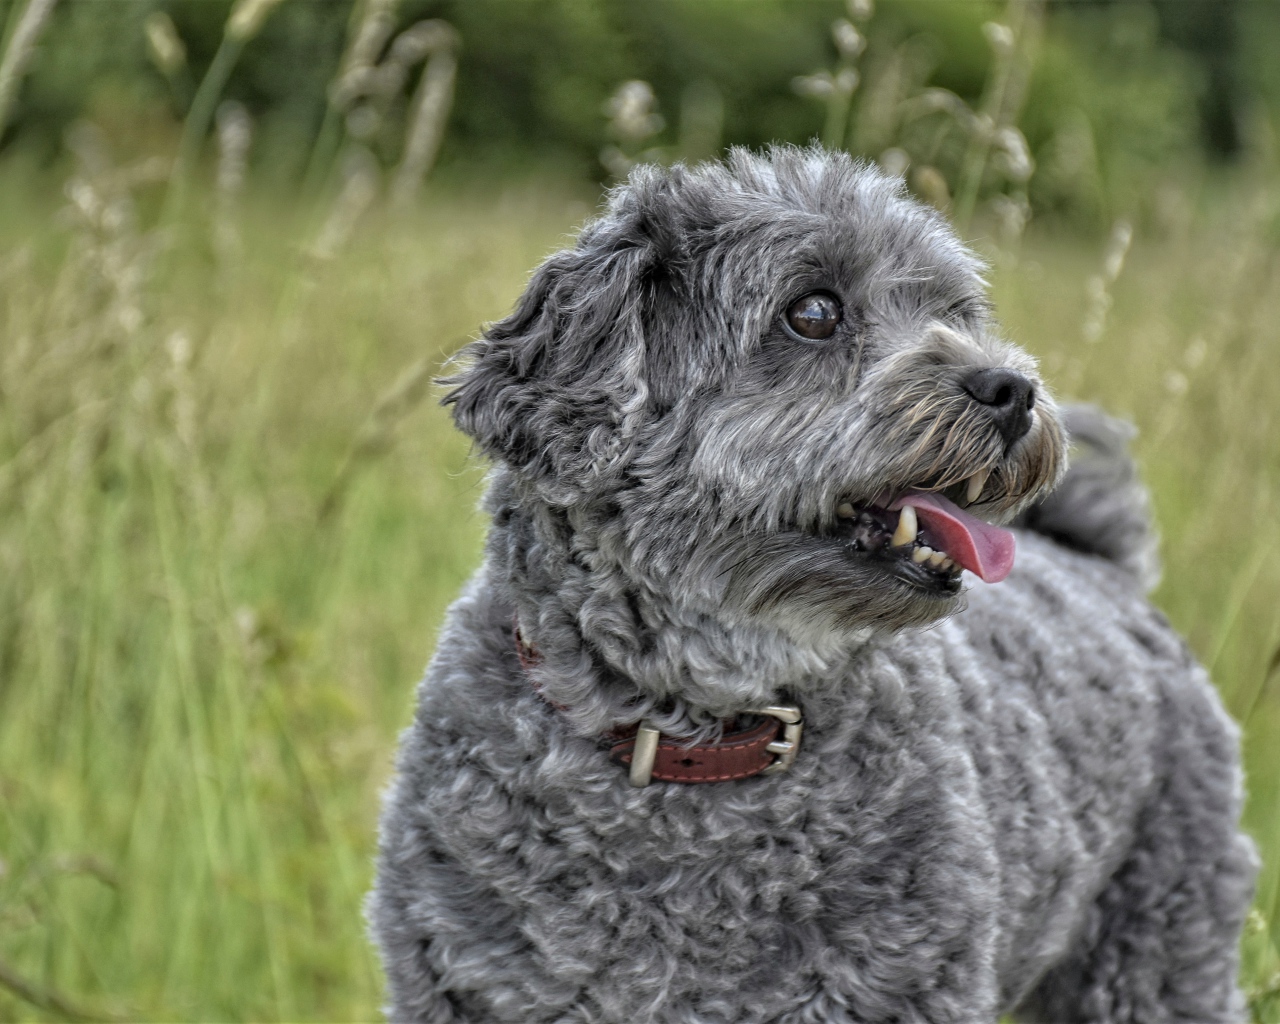 Gray little poodle with tongue hanging out in the grass